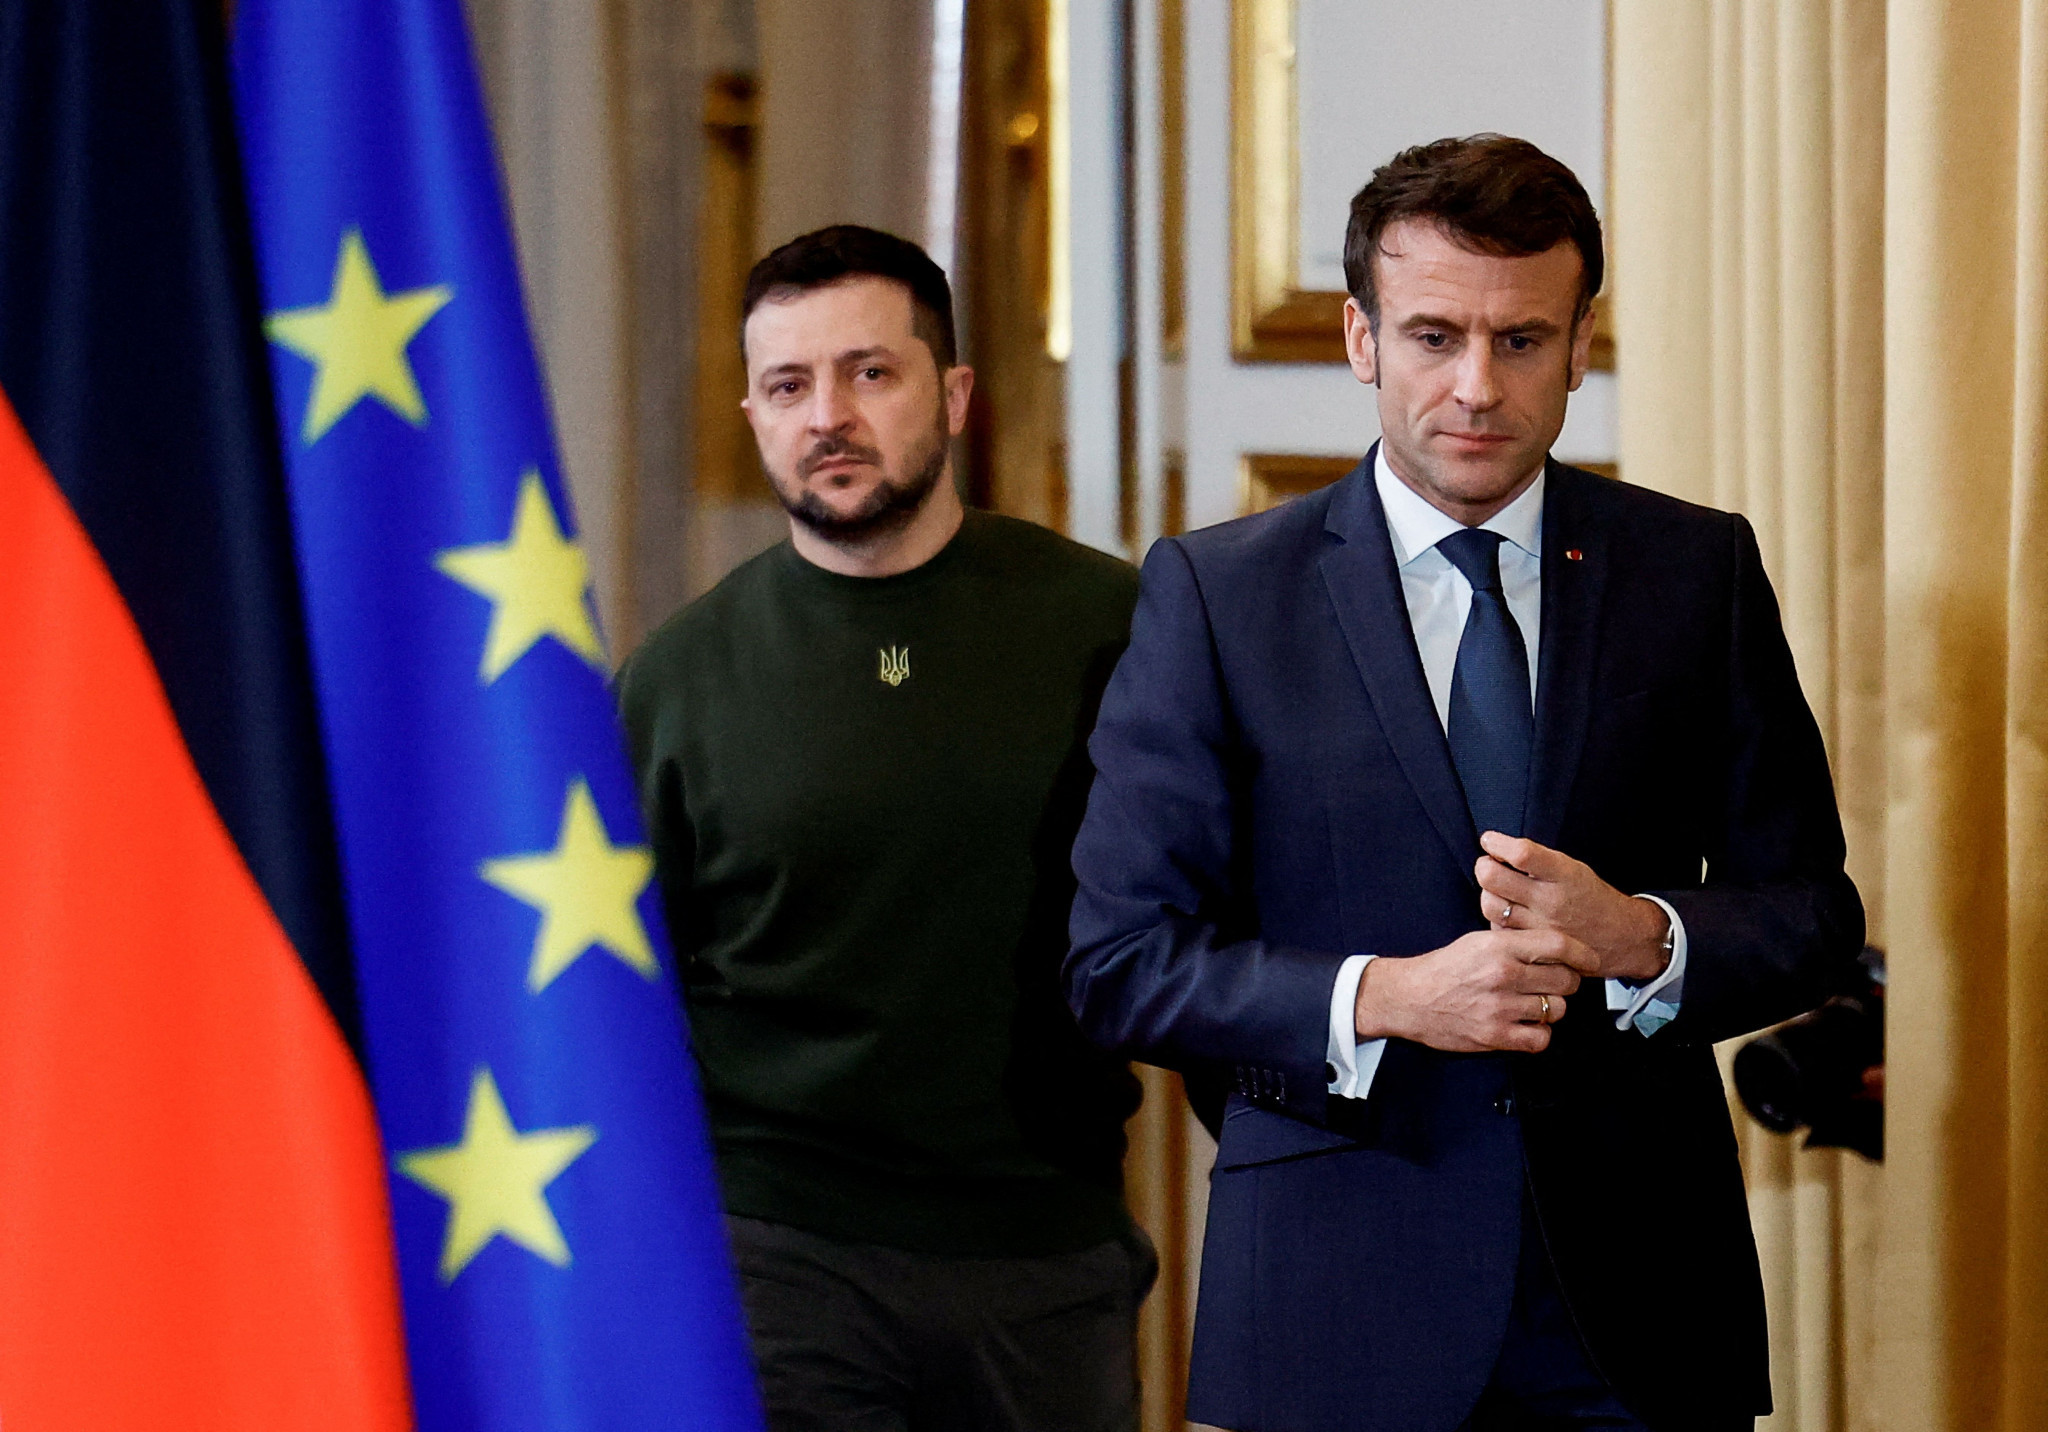 Ukrainian leader Volodymyr Zelenskyy has urged French President Emmanuel Macron tp support efforts to block Russian and Belarusian participation ©Getty Images